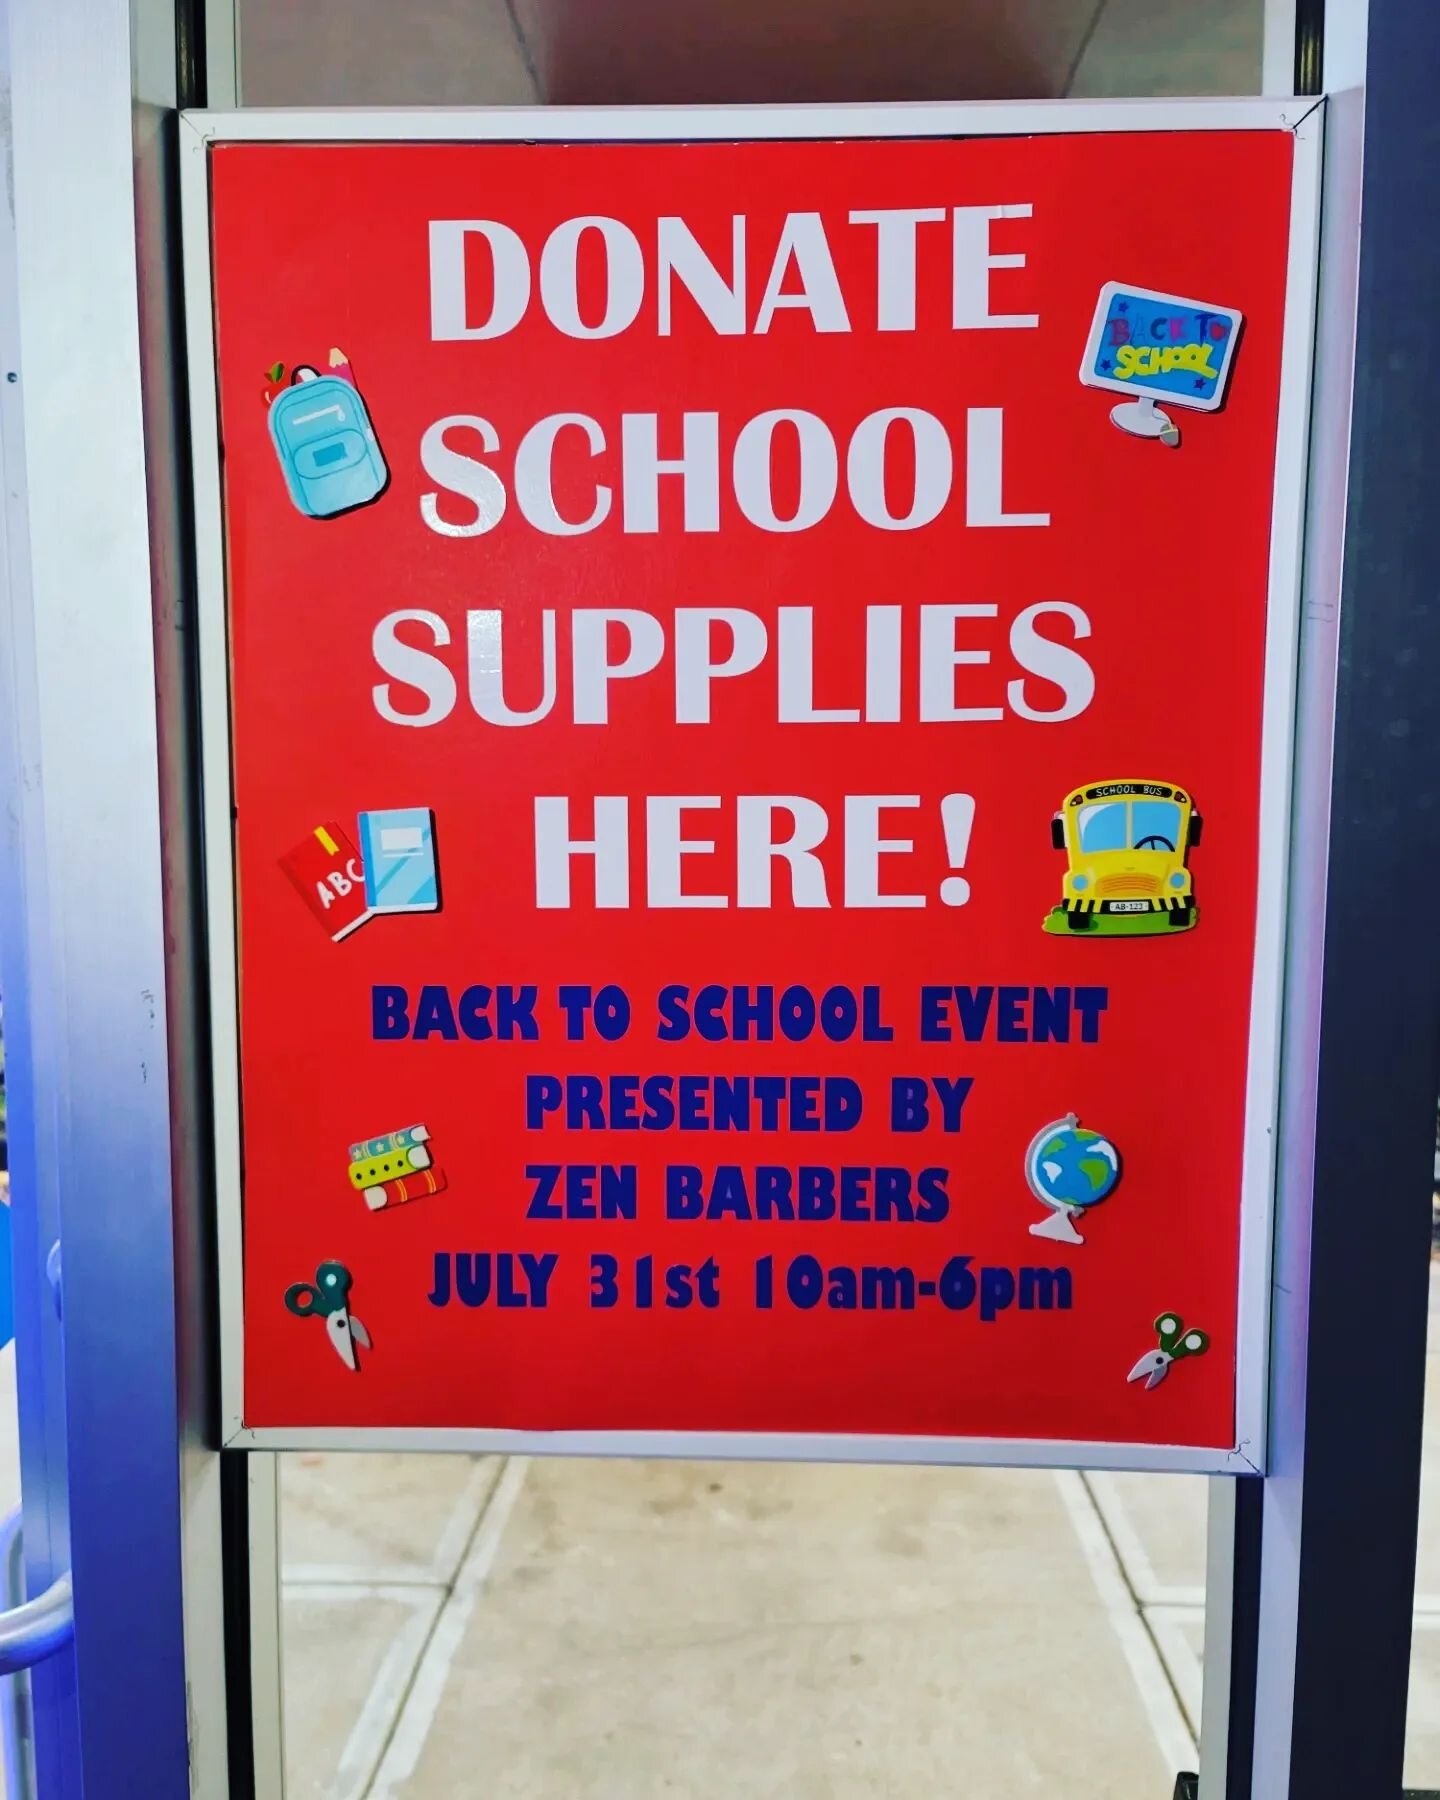 Zen Barbers will be having our FIRST ANNUAL back to school event!!! 

Sunday July 31st. (FLYER COMING SOON)

Zen Barbers
8121 Vineland Ave
Orlando, FL 32821
407-778-1616 

If you are in our area or have any supplies you would like to donate please st